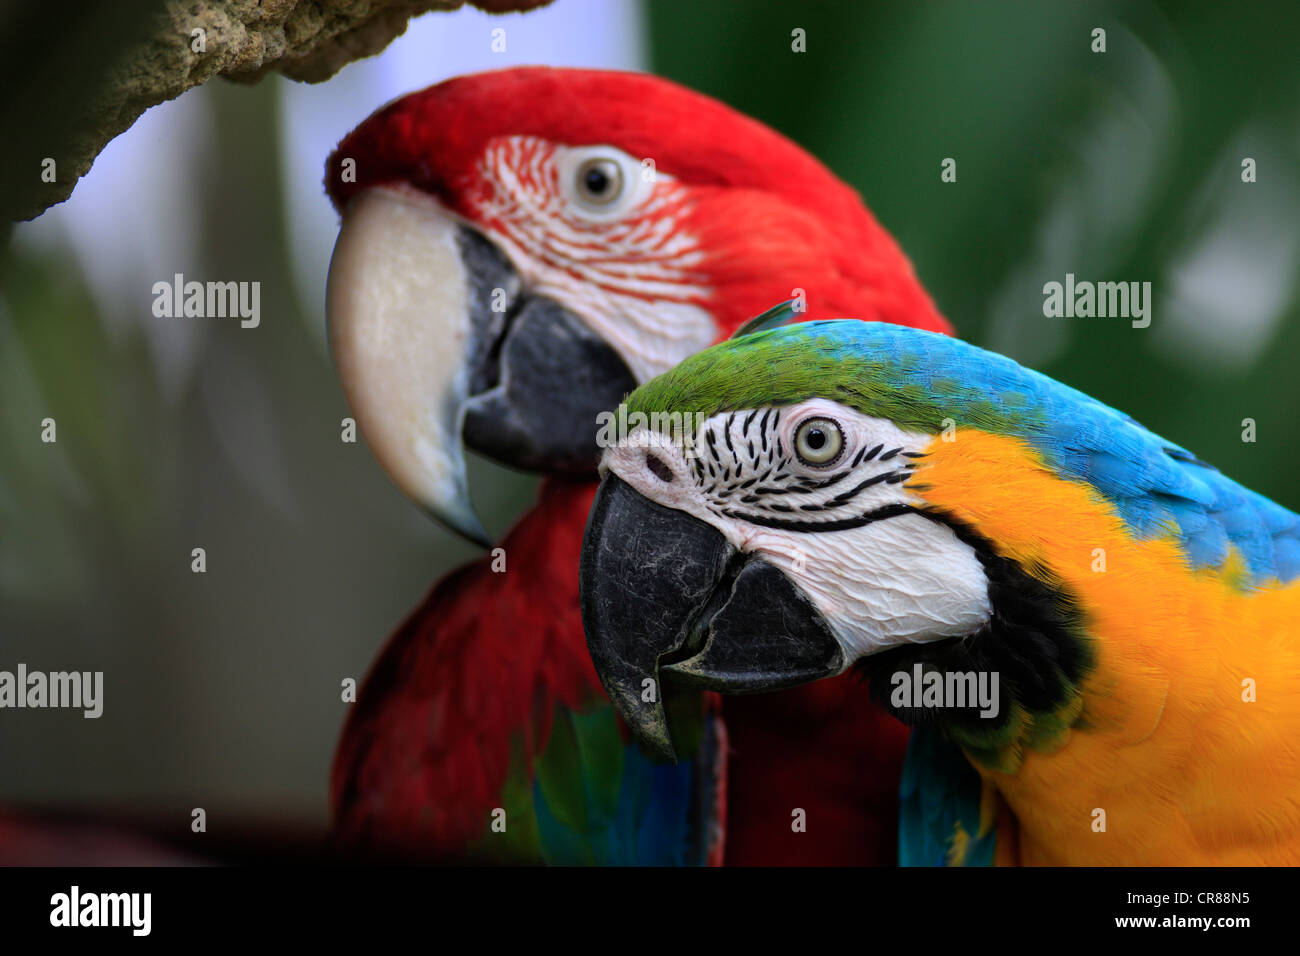 Red-and-green Macaw (Ara chloroptera) and Blue-and-yellow Macaw (Ara ararauna), Portrait, found in South America, Singapore Stock Photo